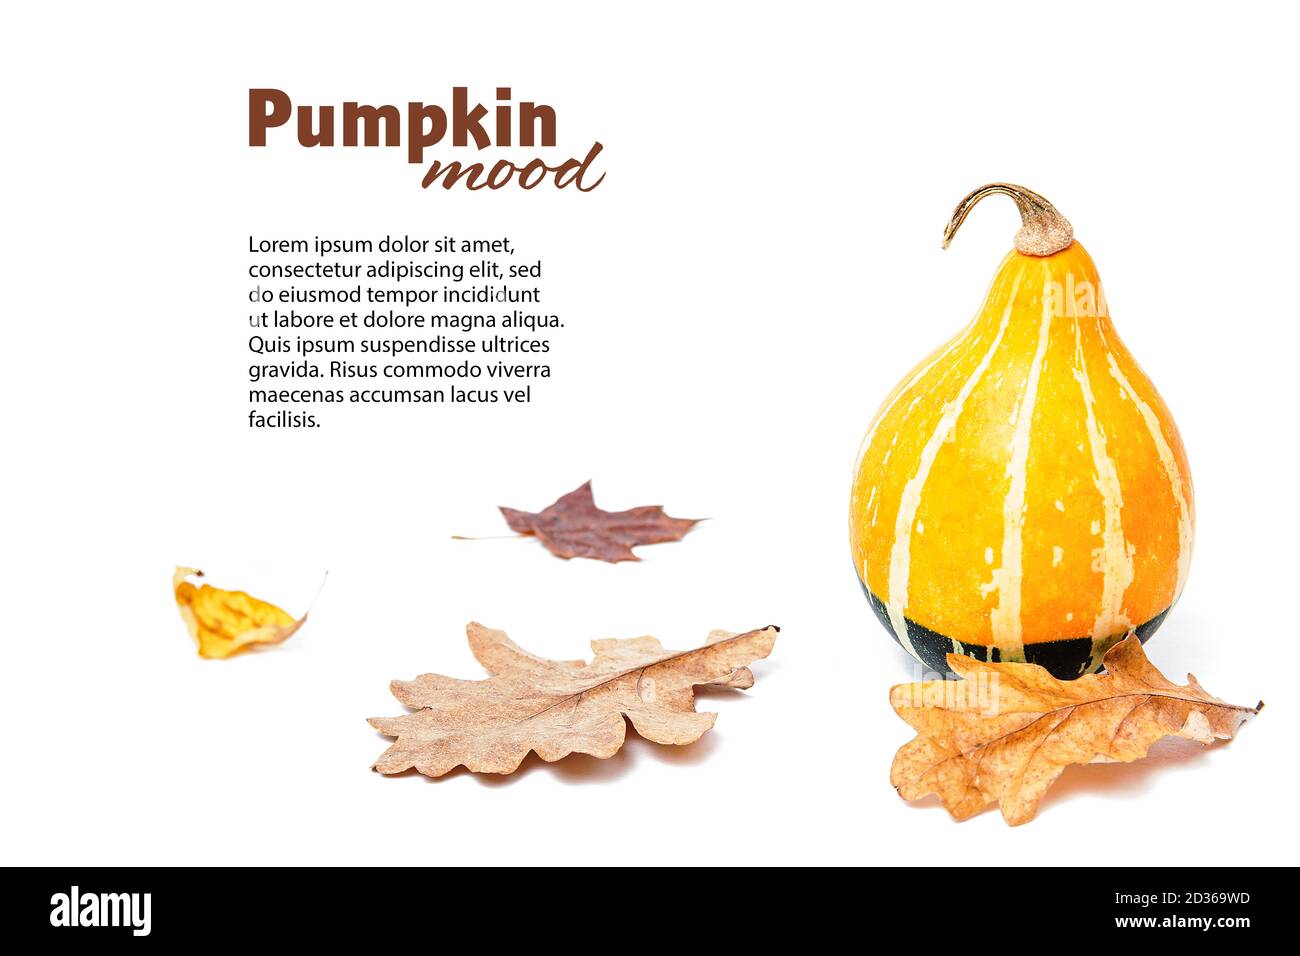 Autumn composition, layout with pumpkin and dried autumn leaves, oak and maple leaves. Pear-shaped Kleine Bicolor pumpkins. Isolated white background. Stock Photo